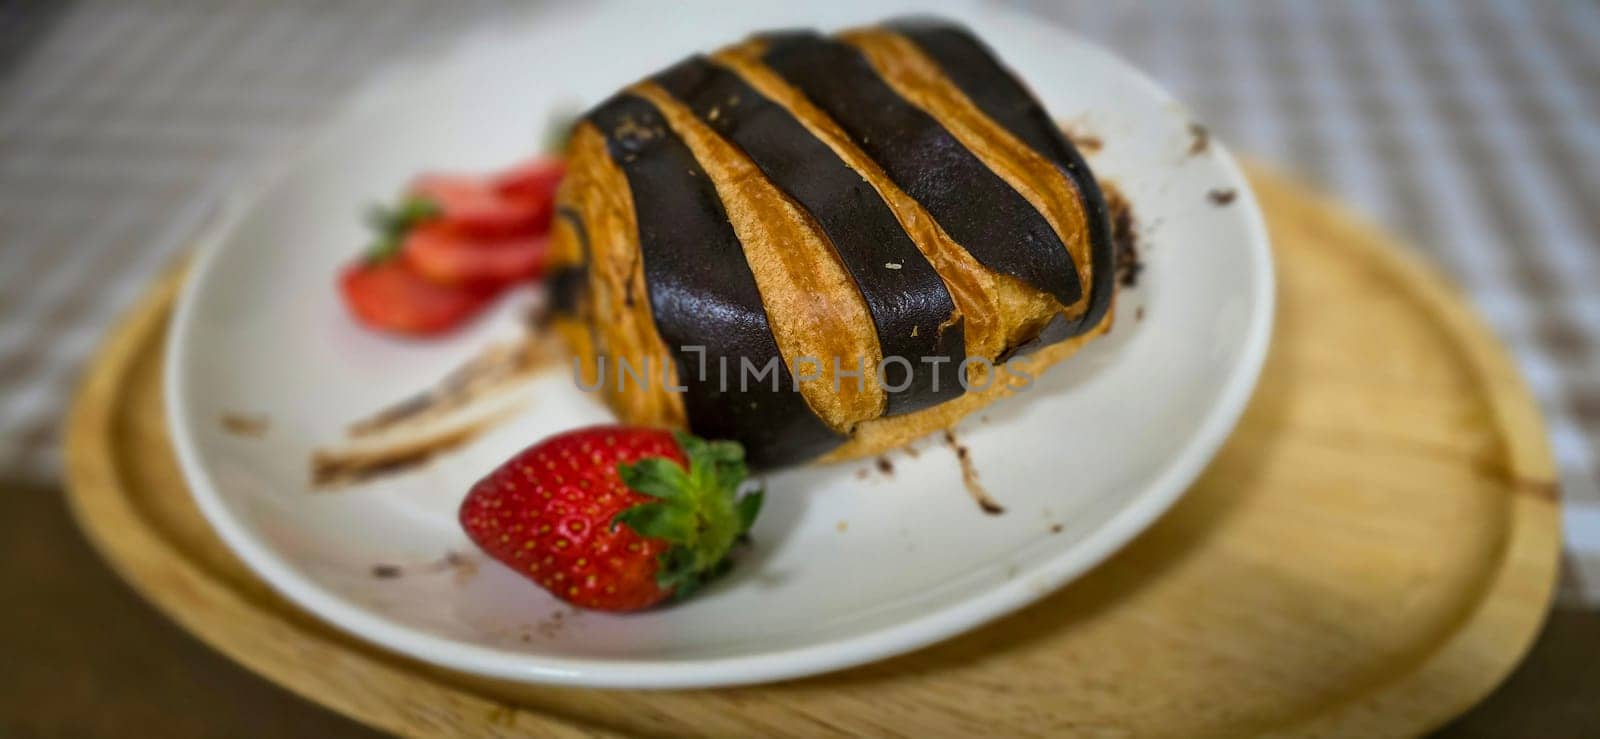 Fresh homemade striped chocolate croissant with chocolate filling on a round white plate, served with fresh strawberry, good cooking ideas